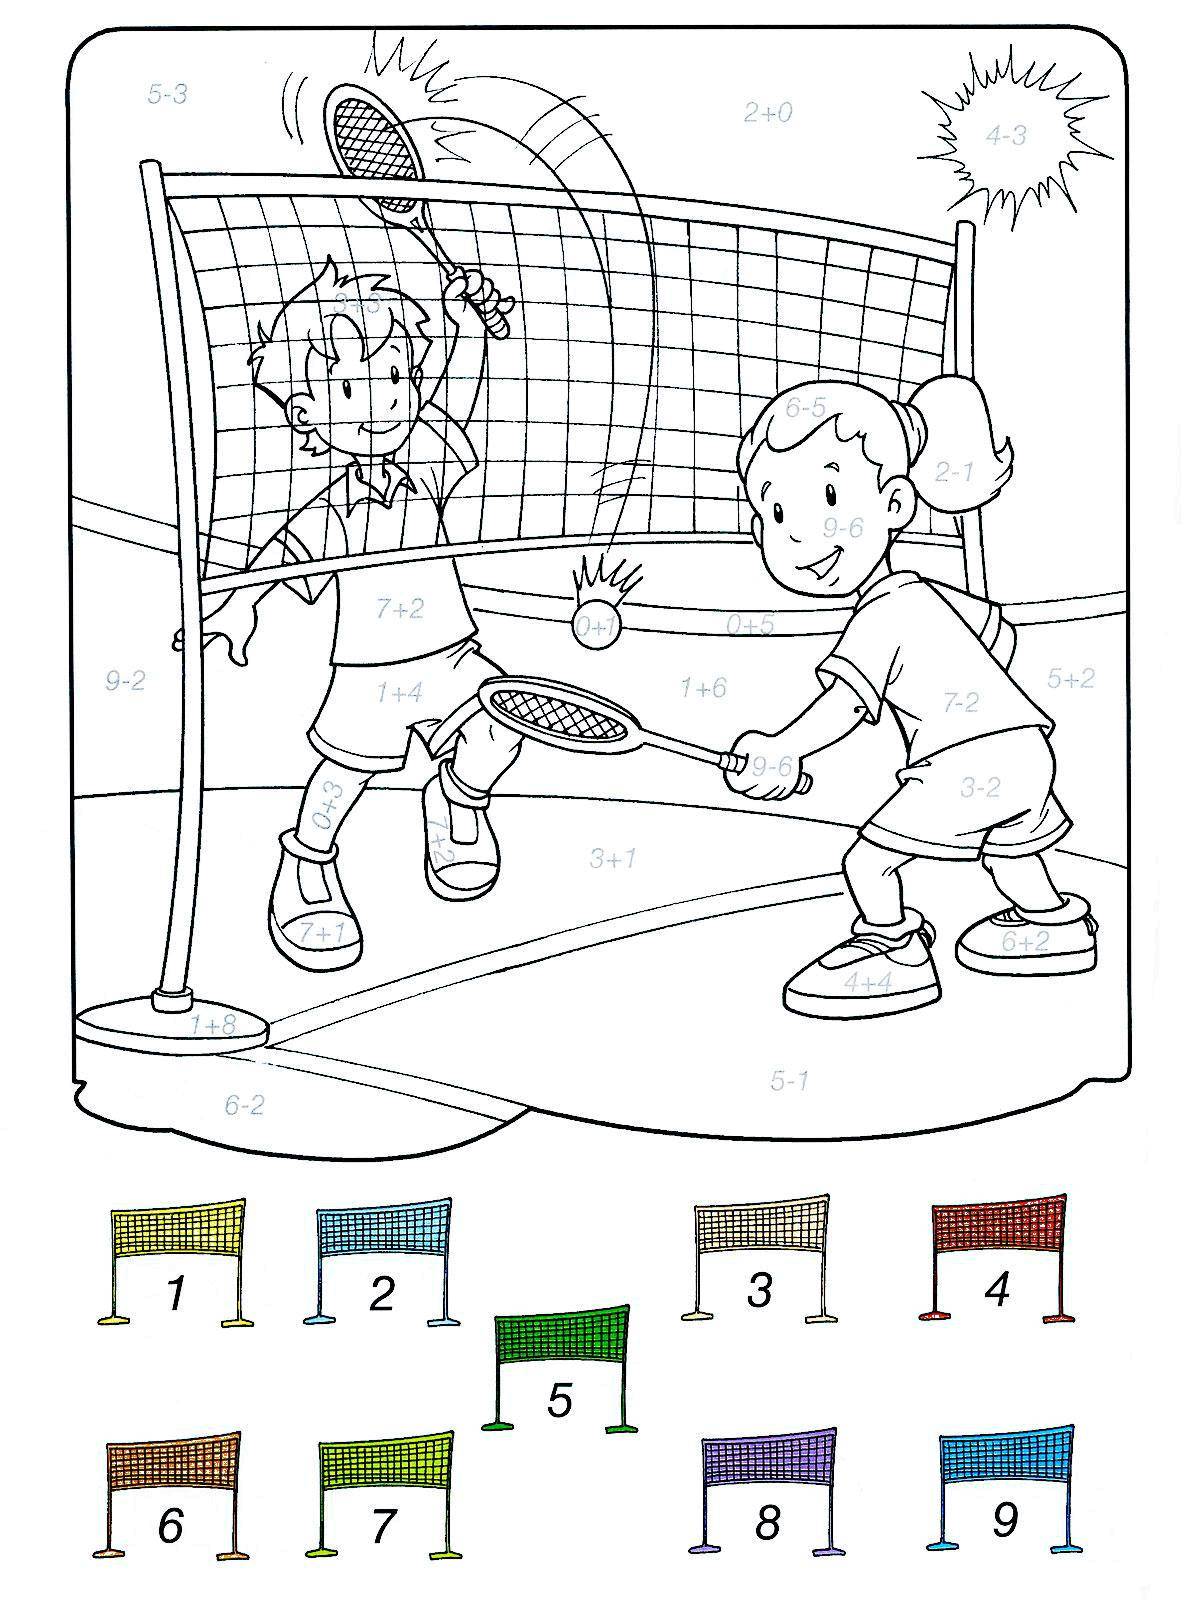 Coloring Paint tennis players deciding examples. Category mathematical coloring pages. Tags:  sports, kids, tennis, examples.